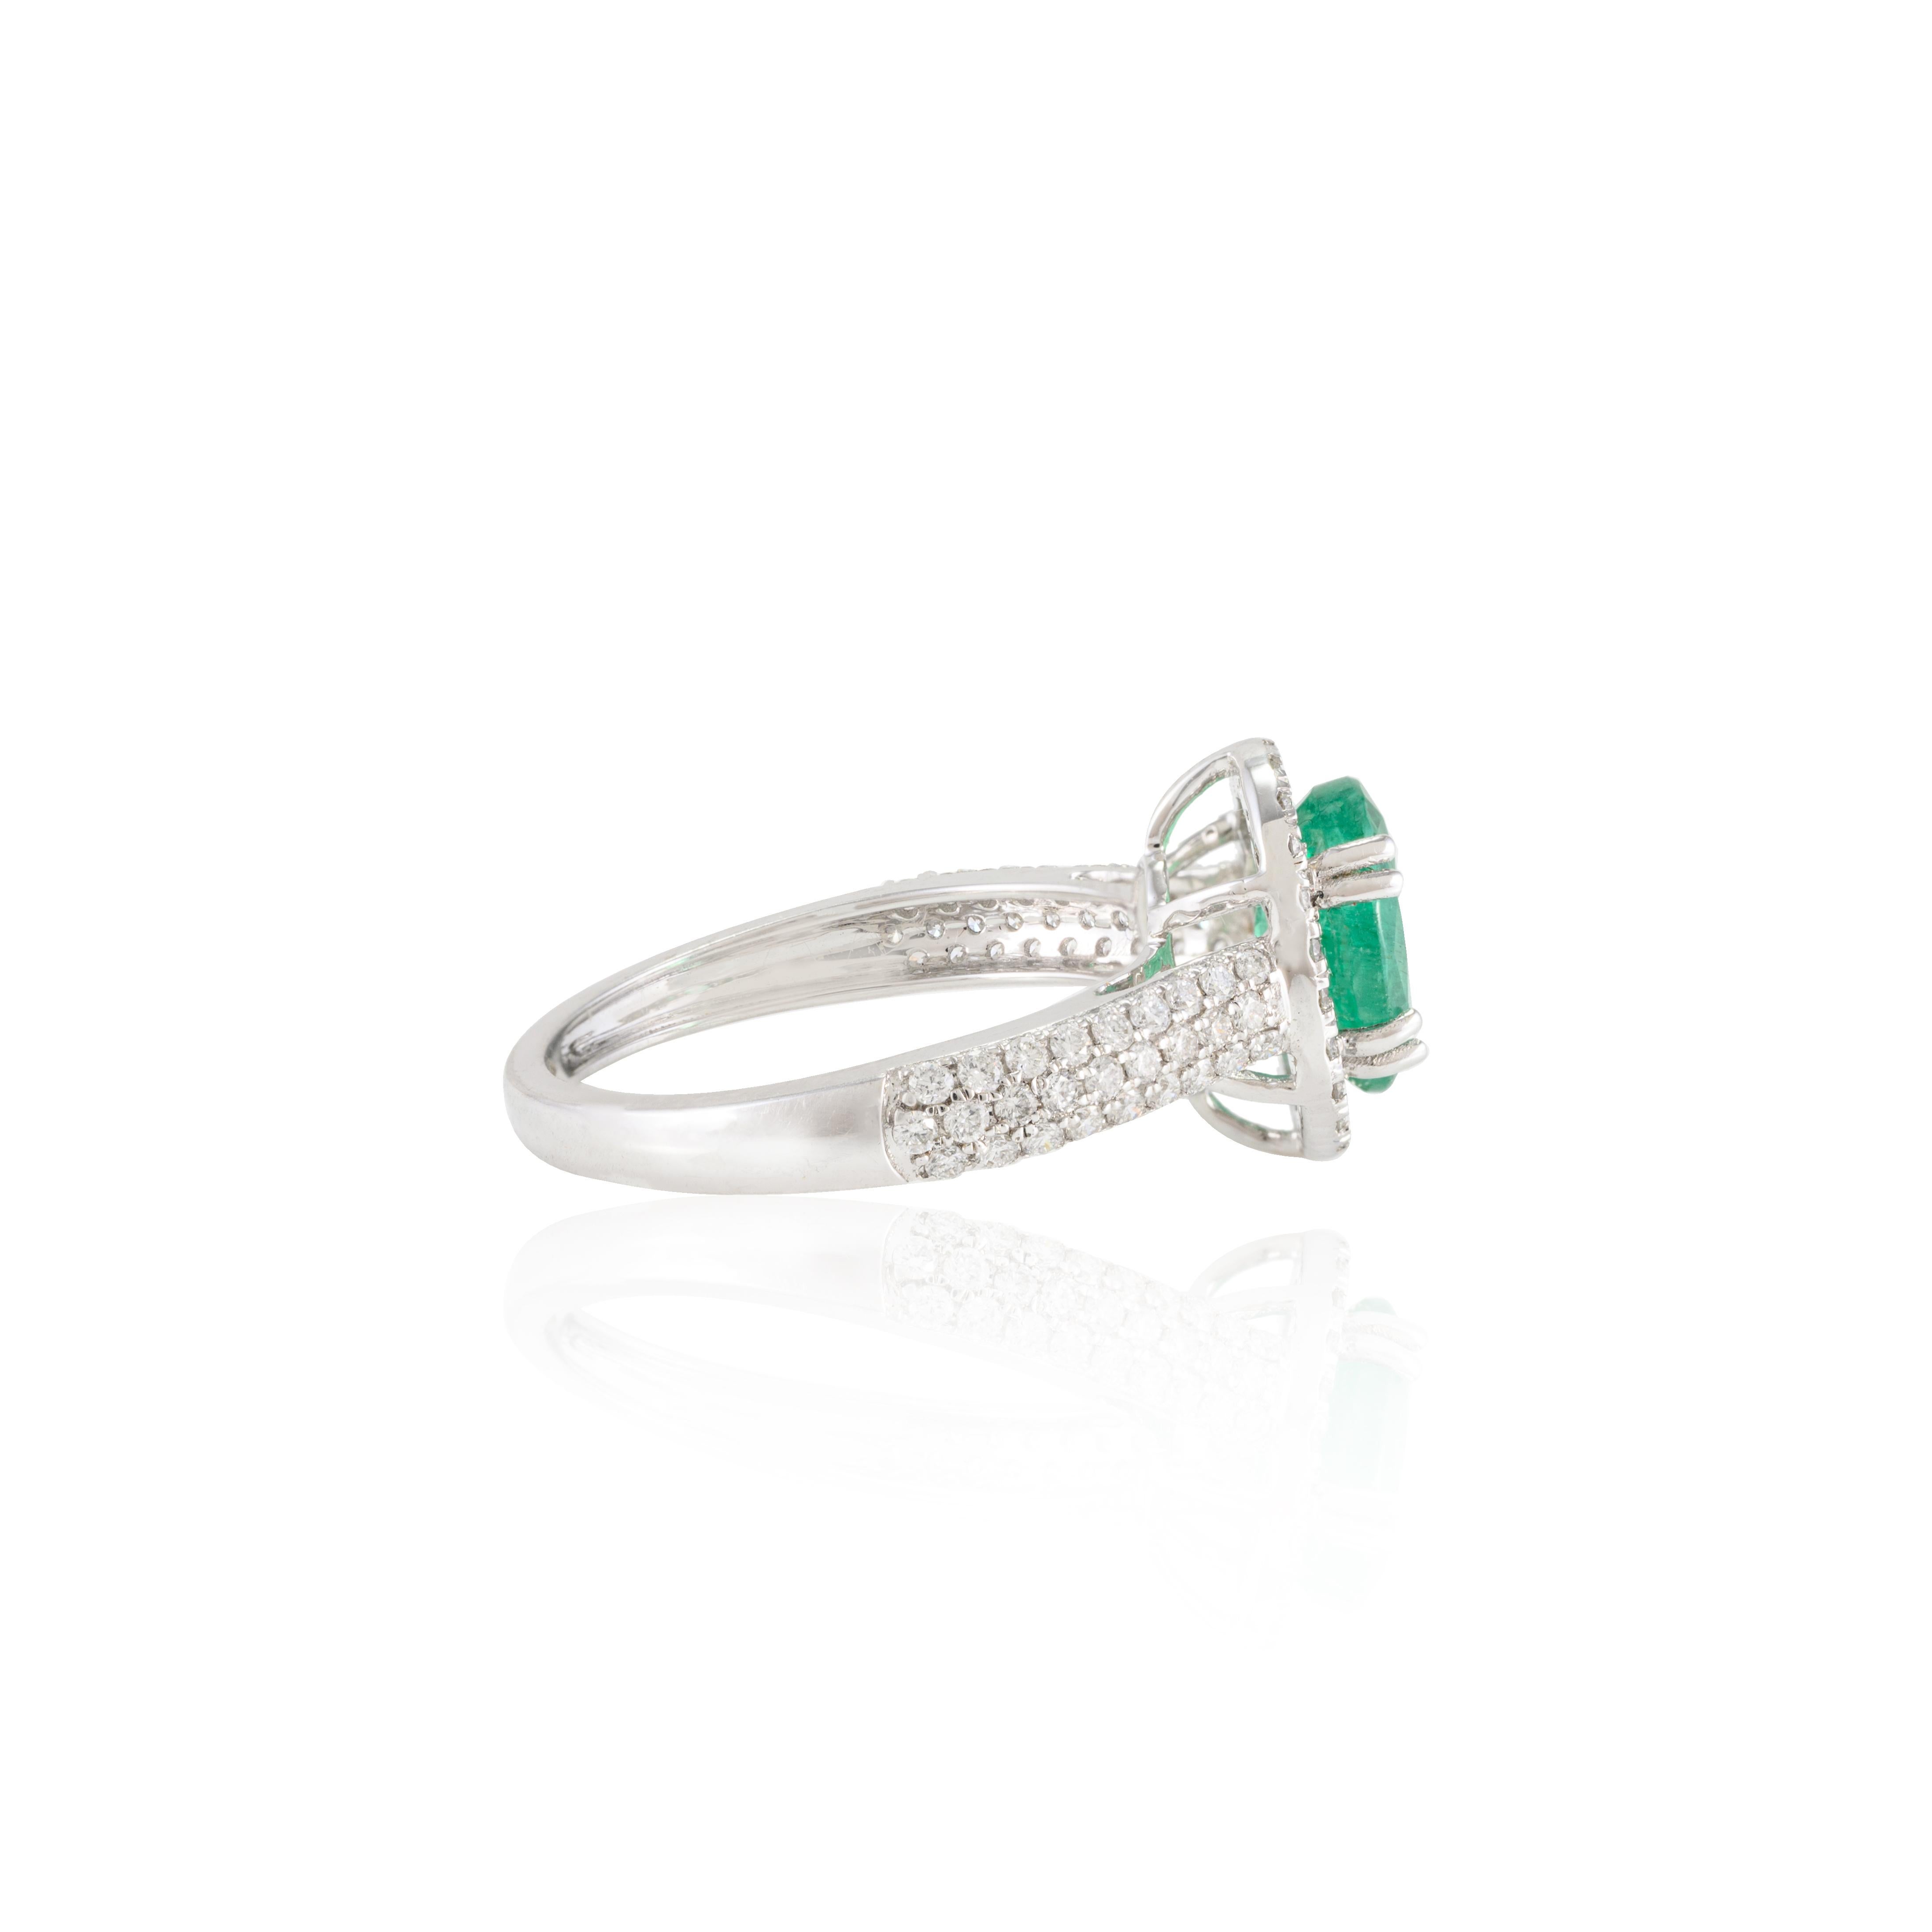 For Sale:  18k Solid White Gold Glamorous Emerald and Diamond Engagement Ring for Her 5